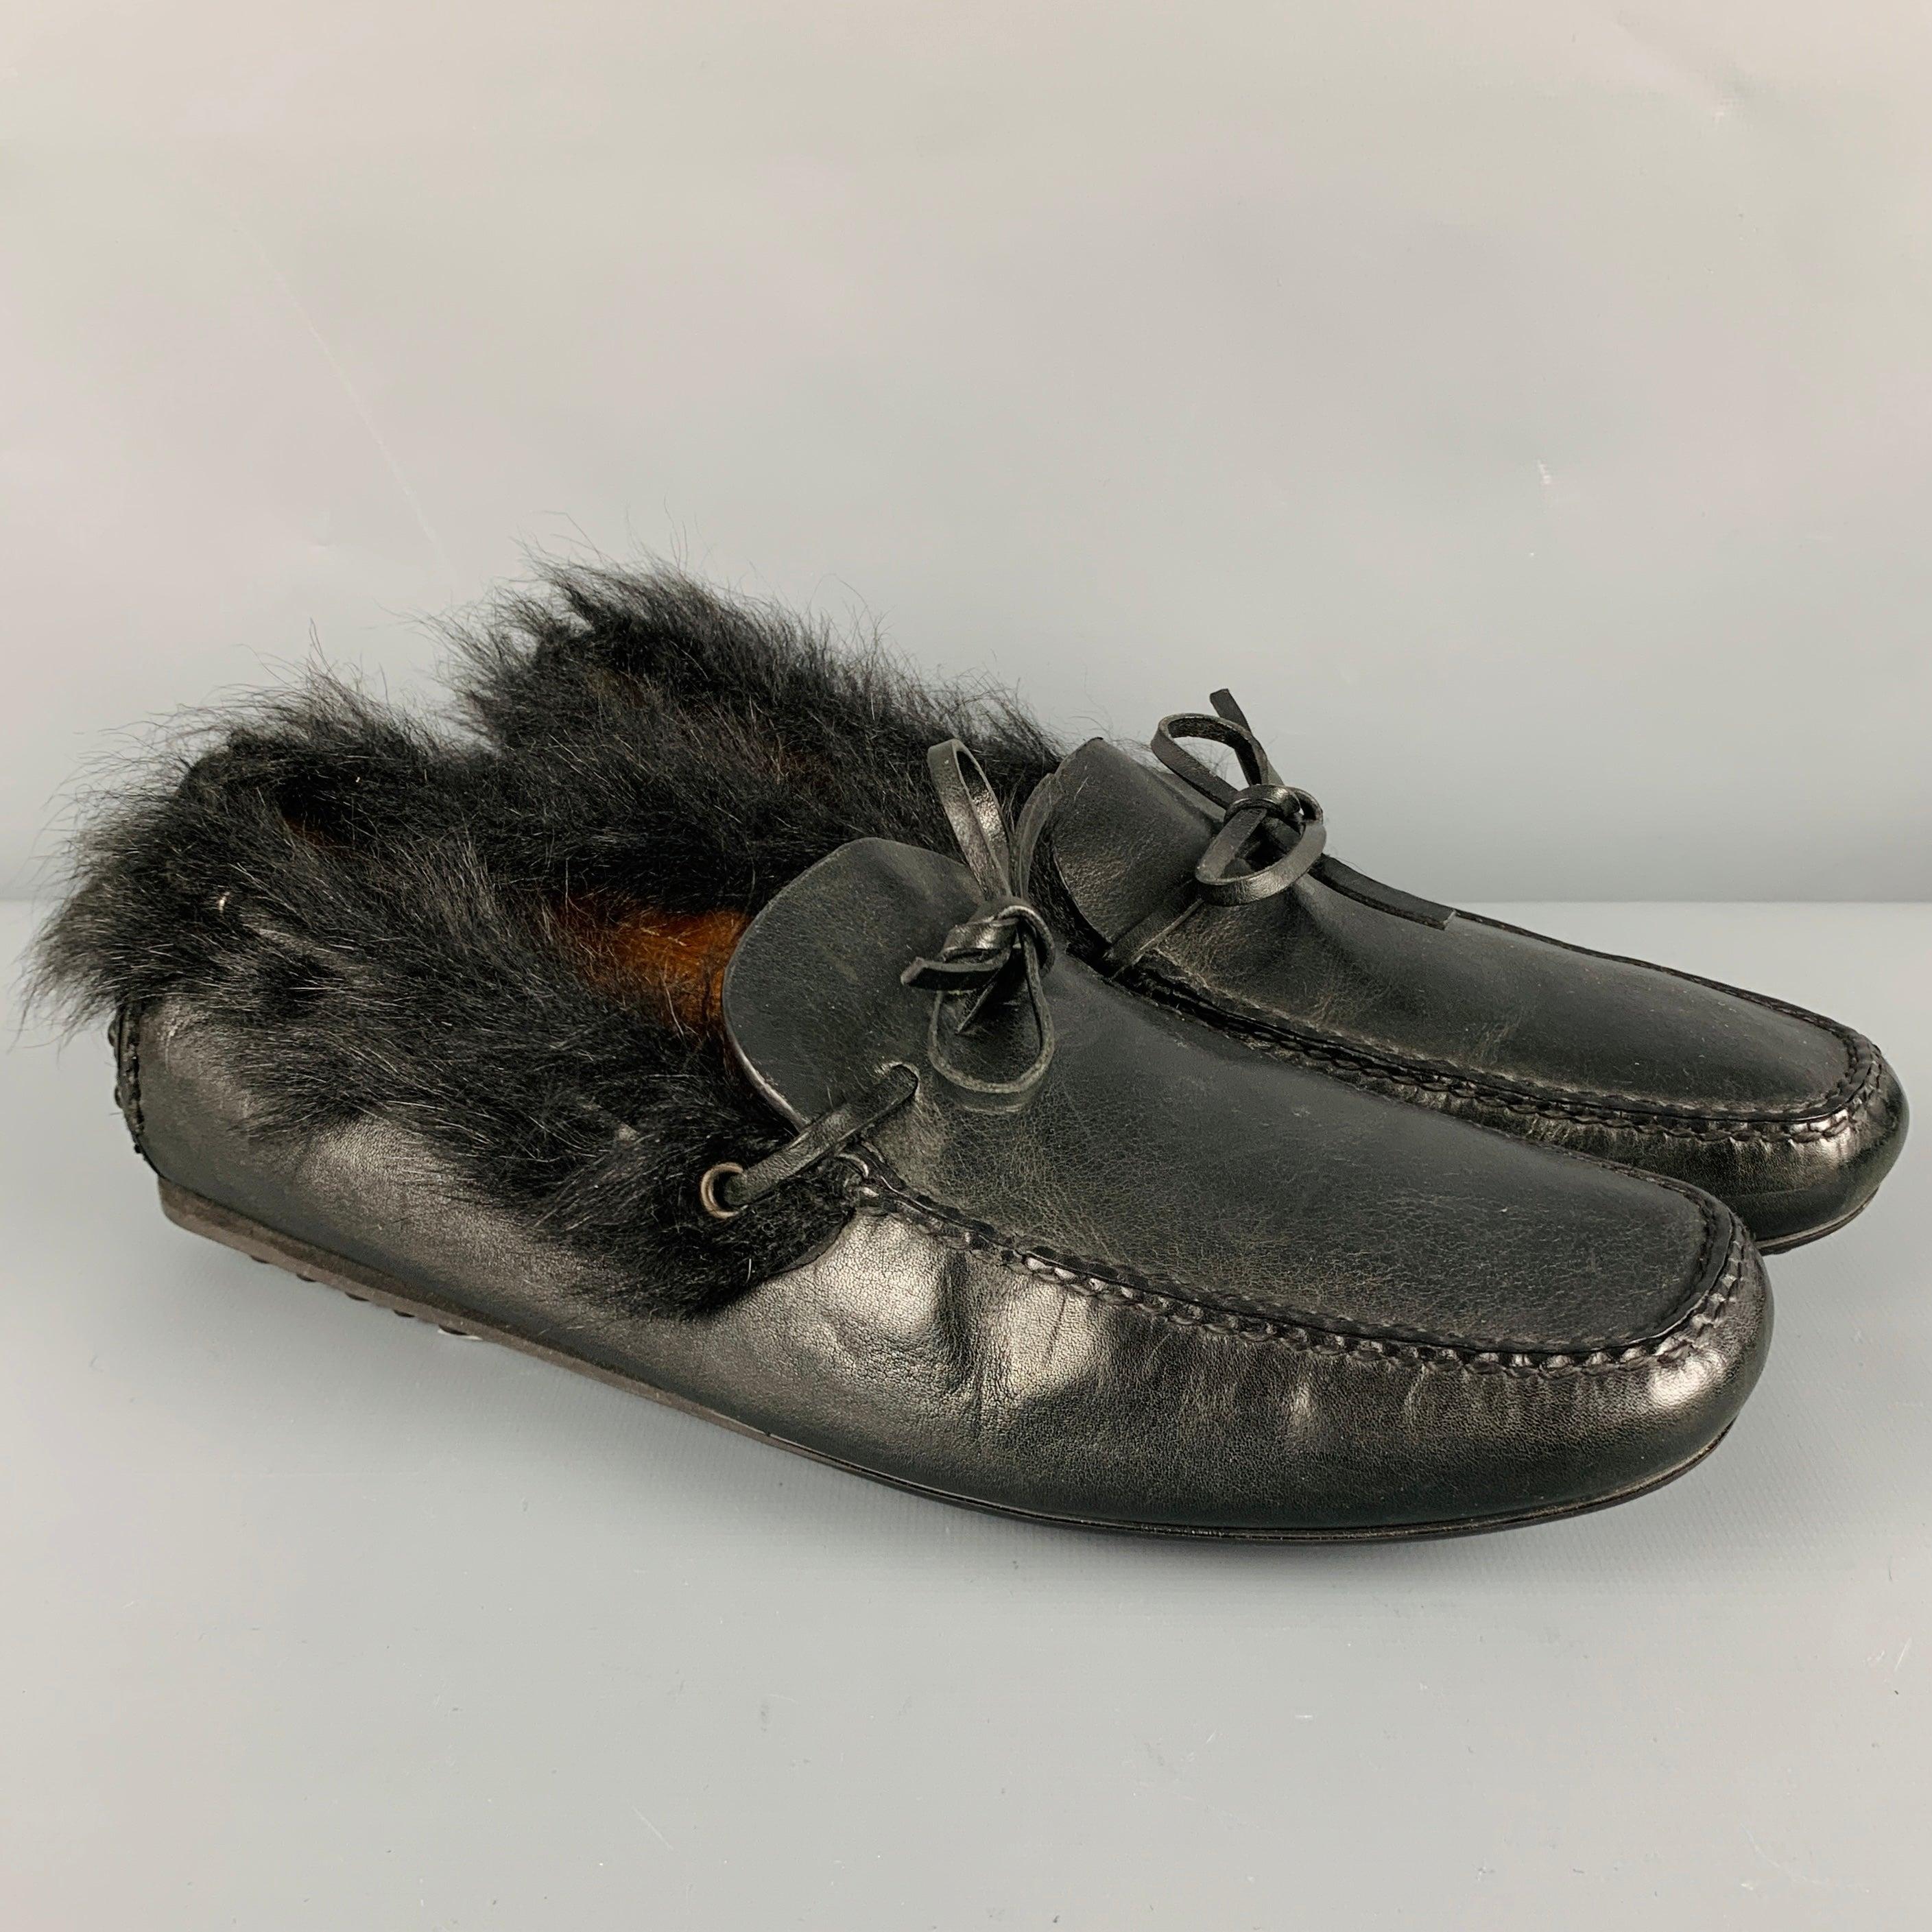 CAR SHOE loafers
in a black leather fabric featuring a driver's style, fur trim, bow detail, and slip on closure. Made in Italy.Very Good Pre-Owned Condition. Minor signs of wear on fur trim. 

Marked:   80078 COutsole: 11 inches  x 4 inches 
  
  
